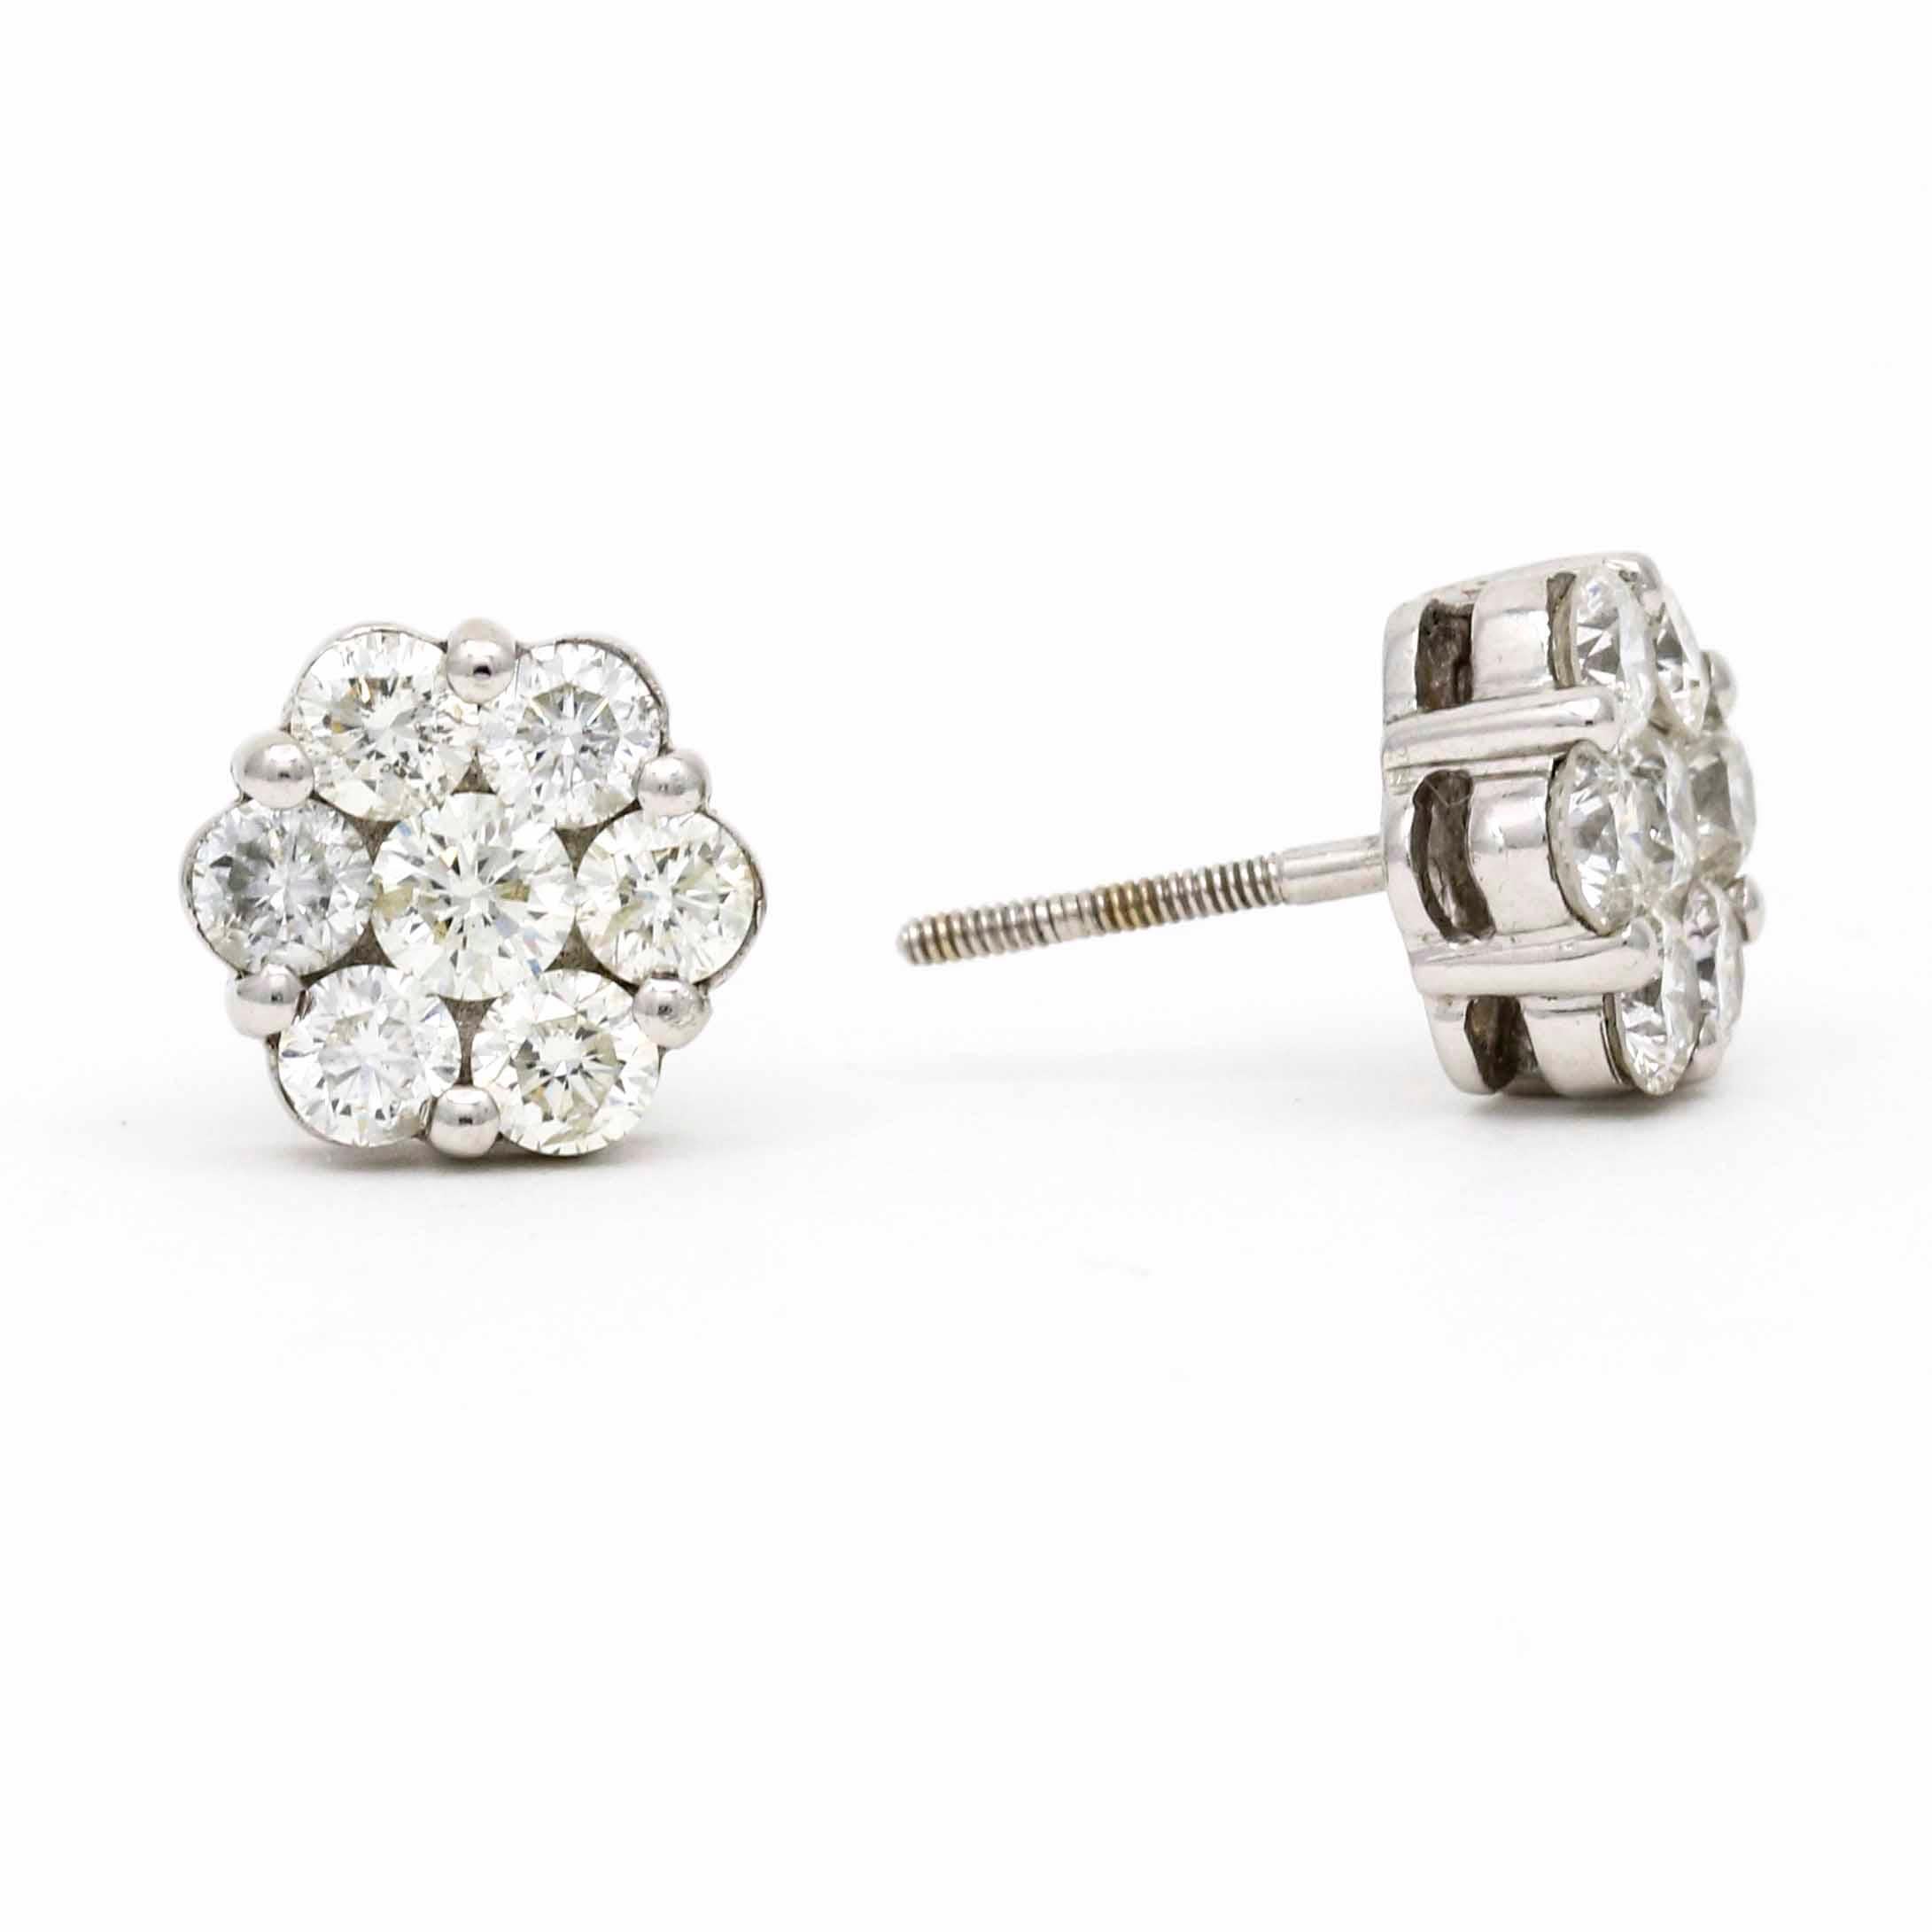 Highlight your elegance with these sparkling diamond earrings crafted in 18k white gold. The cluster of diamonds looks like a bigger diamond, with seven brilliant round-cut diamonds that add sparkle to any occasion. They're in excellent condition